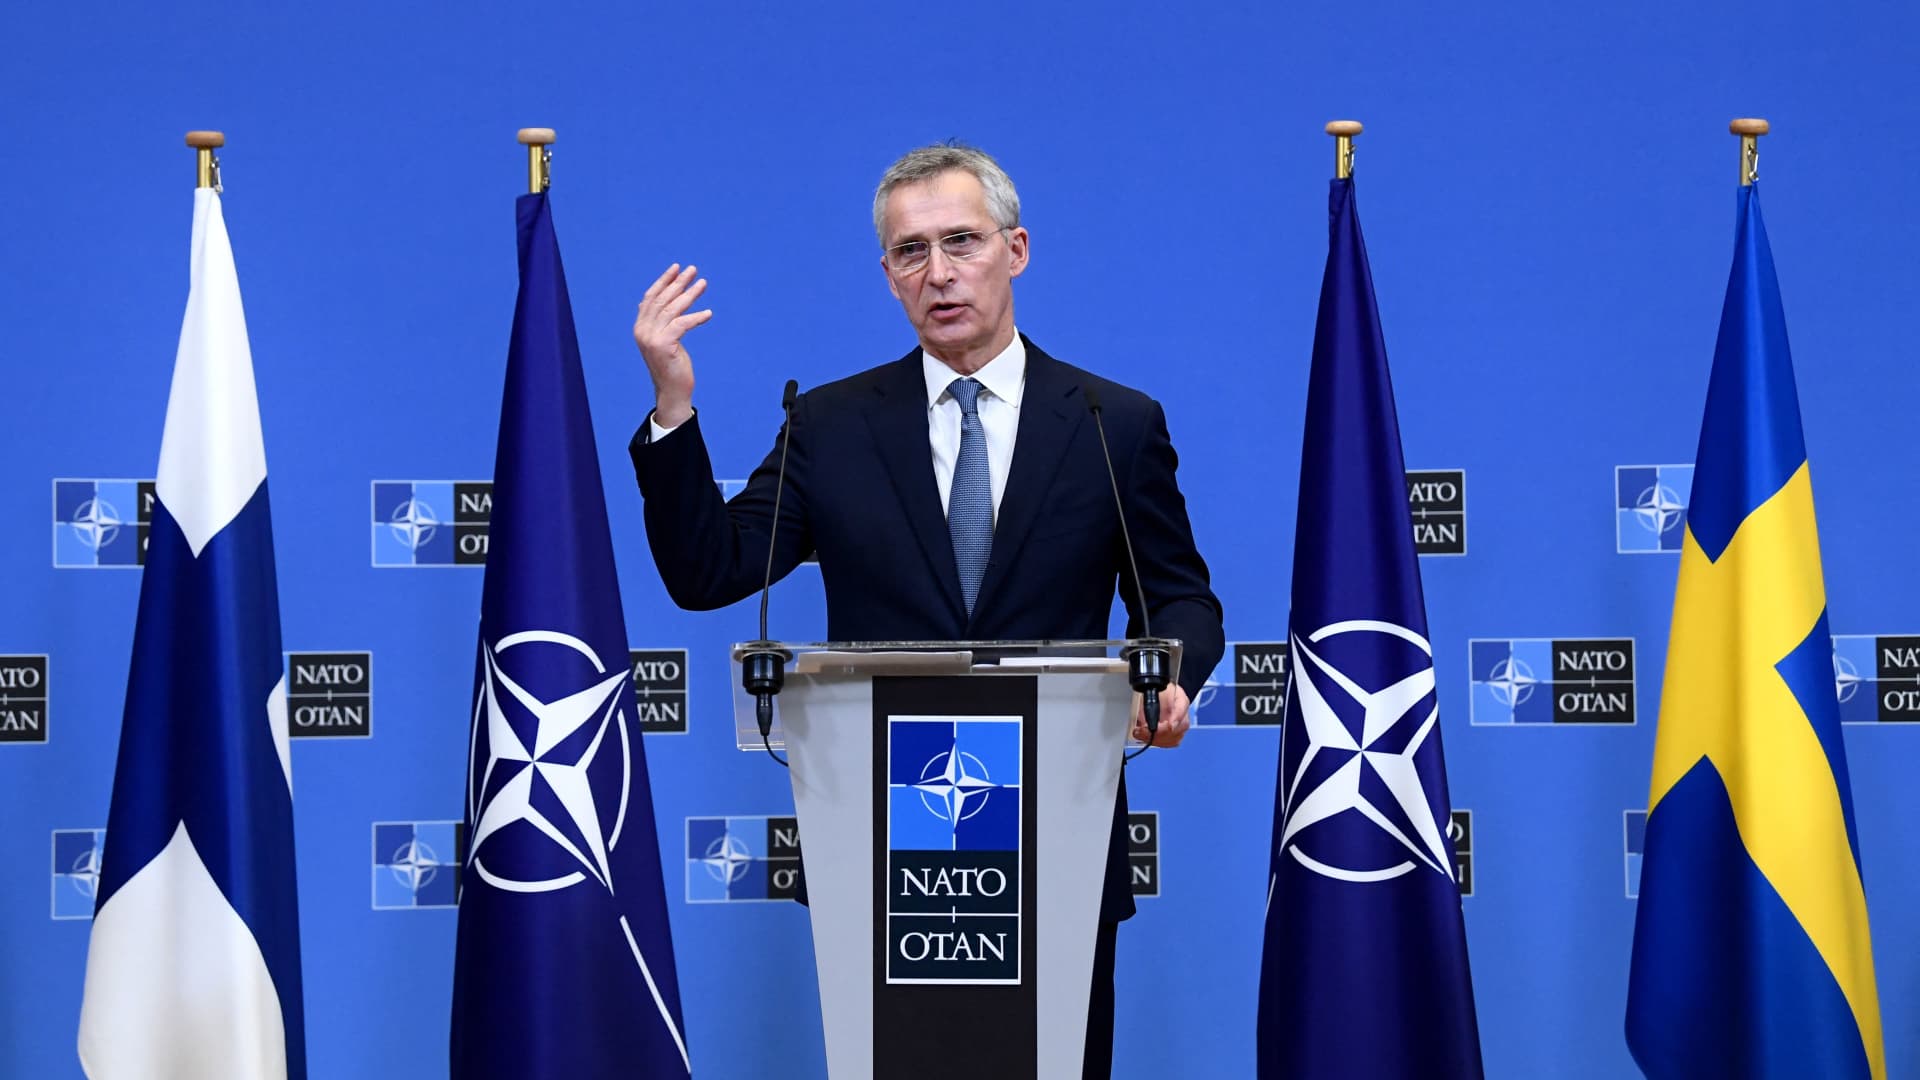 NATO Secretary General Jens Stoltenberg talks speaks during a joint press with Sweden and Finland's Foreign ministers after their meeting at the Nato headquarters in Brussels on January 24, 2022.